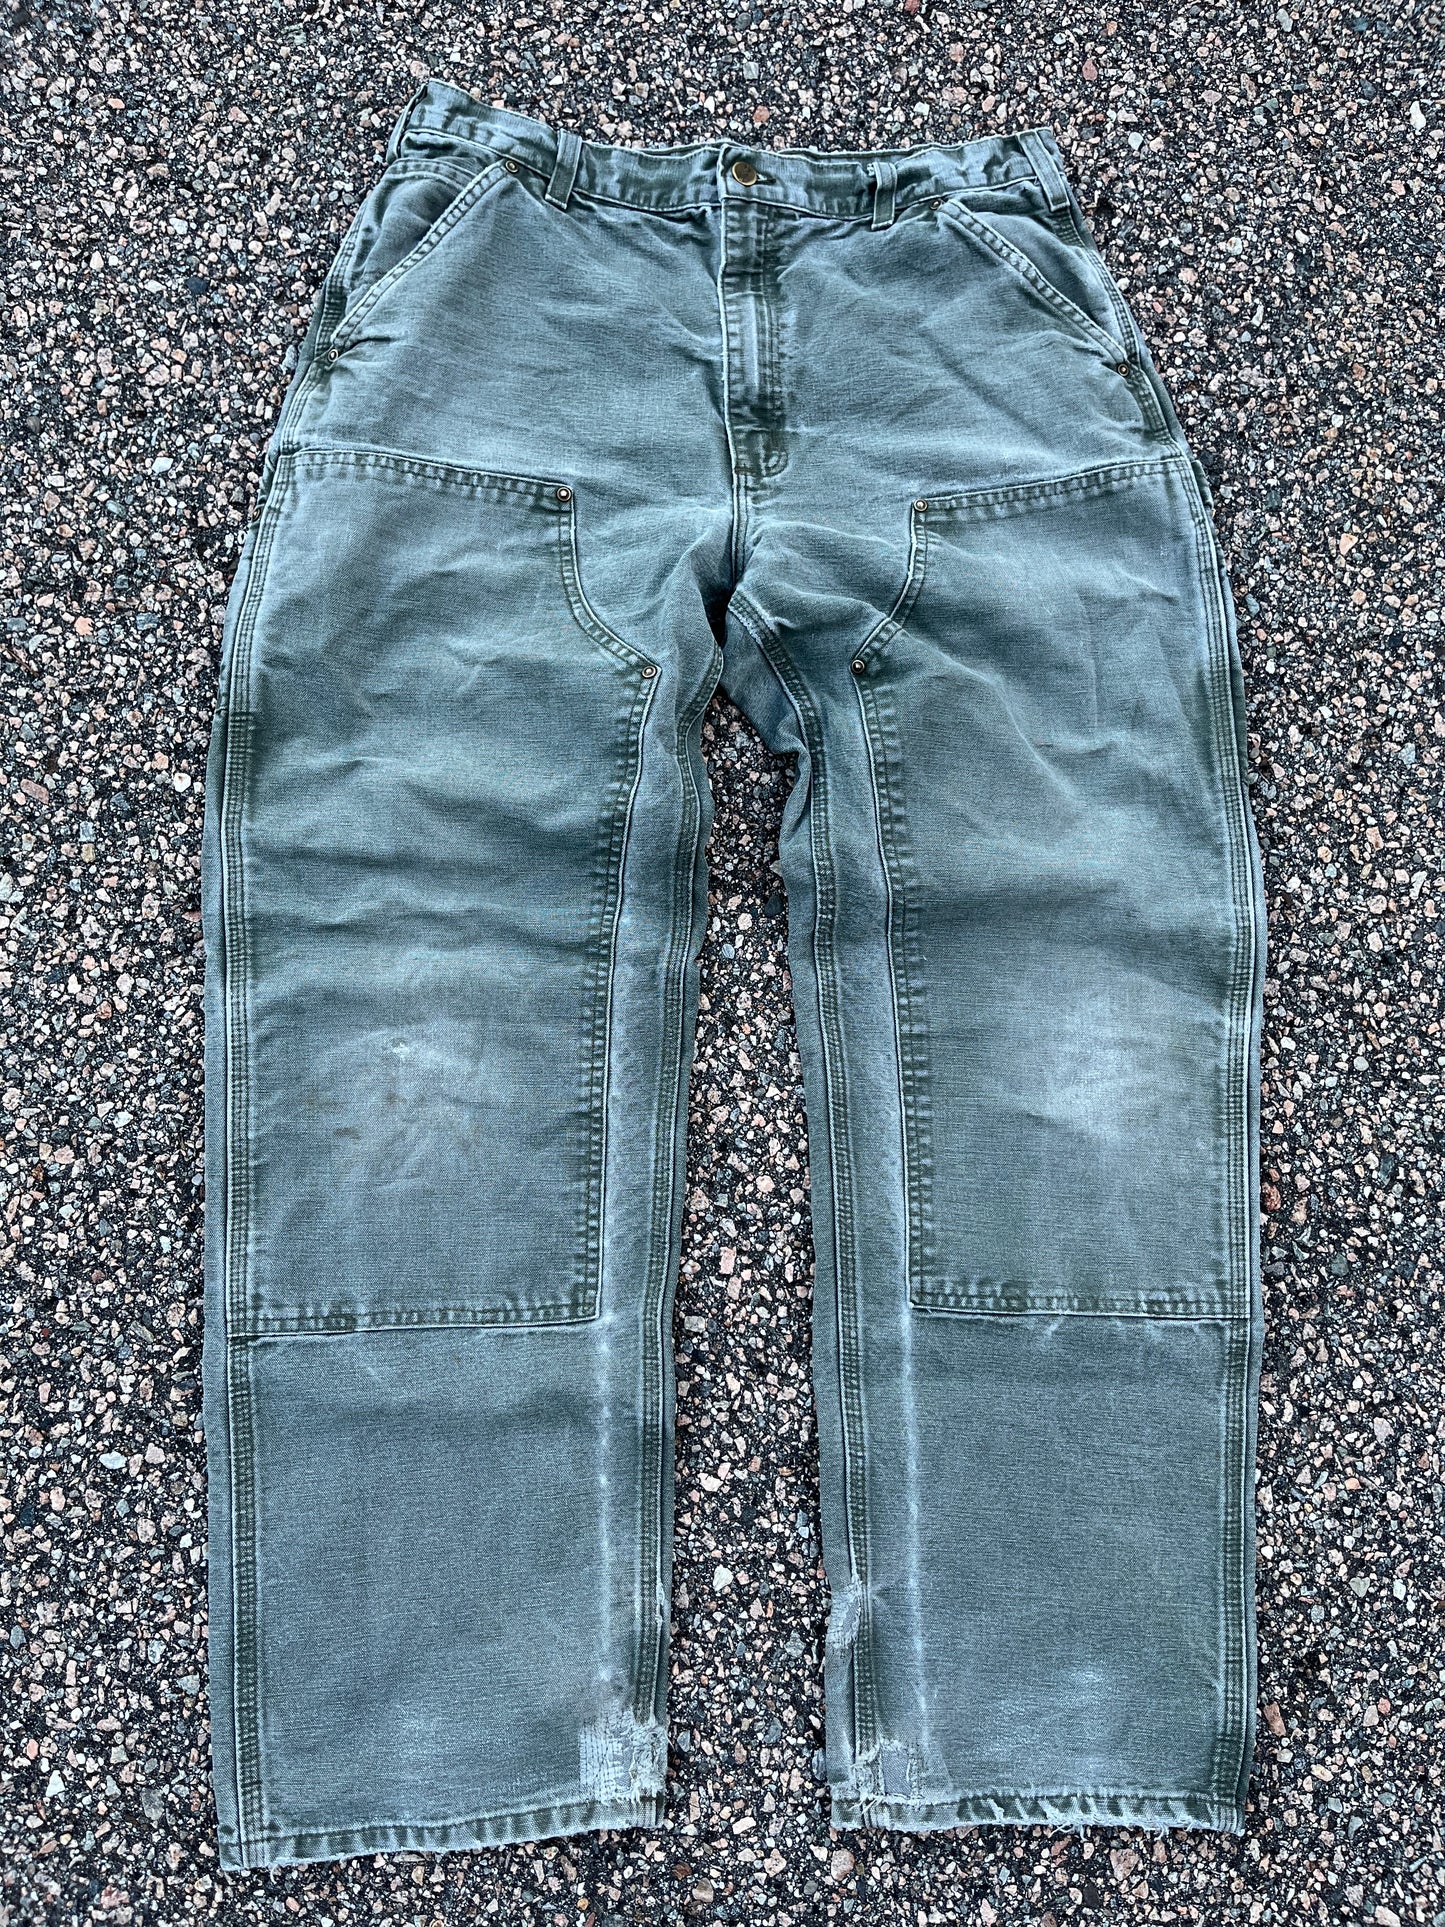 Faded Olive Green Carhartt Double Knee Pants - 34 x 30